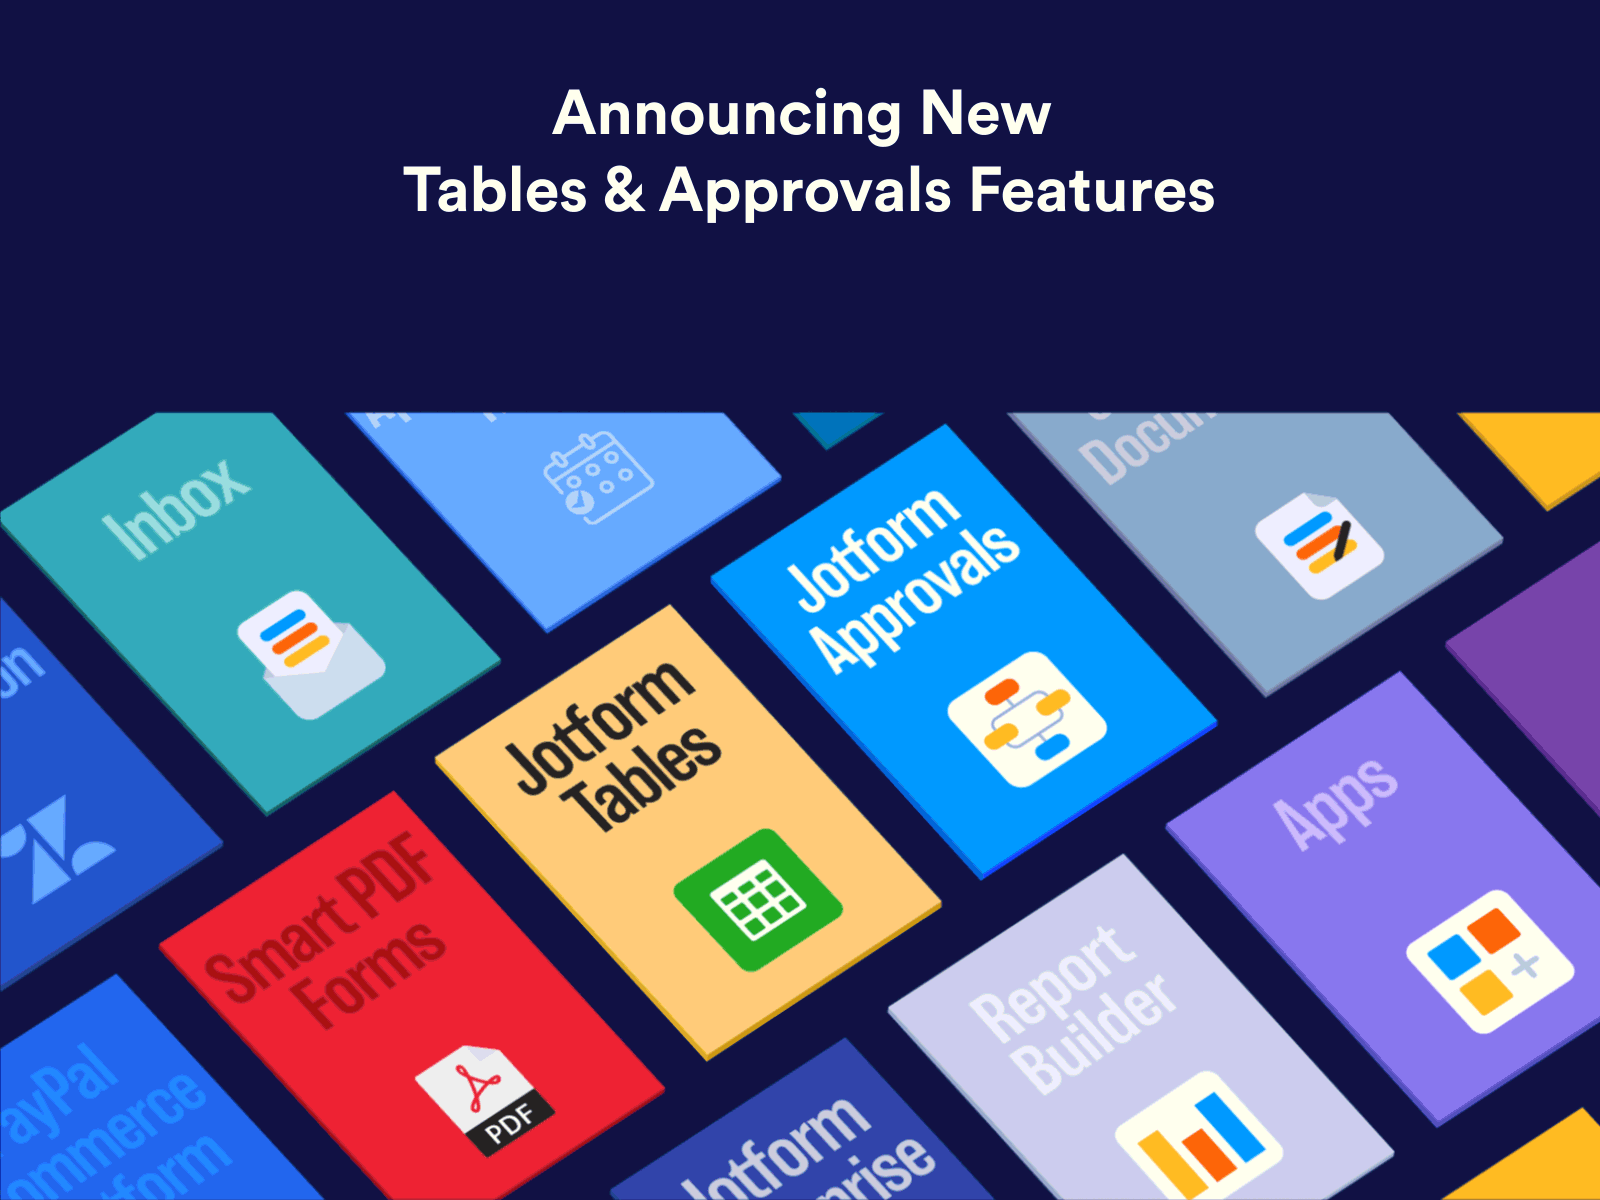 Announcing new Approvals and Tables features approval workflow approvals assign assignee featre feature jotform jotform approvals jotform assignee jotform tables sheet signature tables